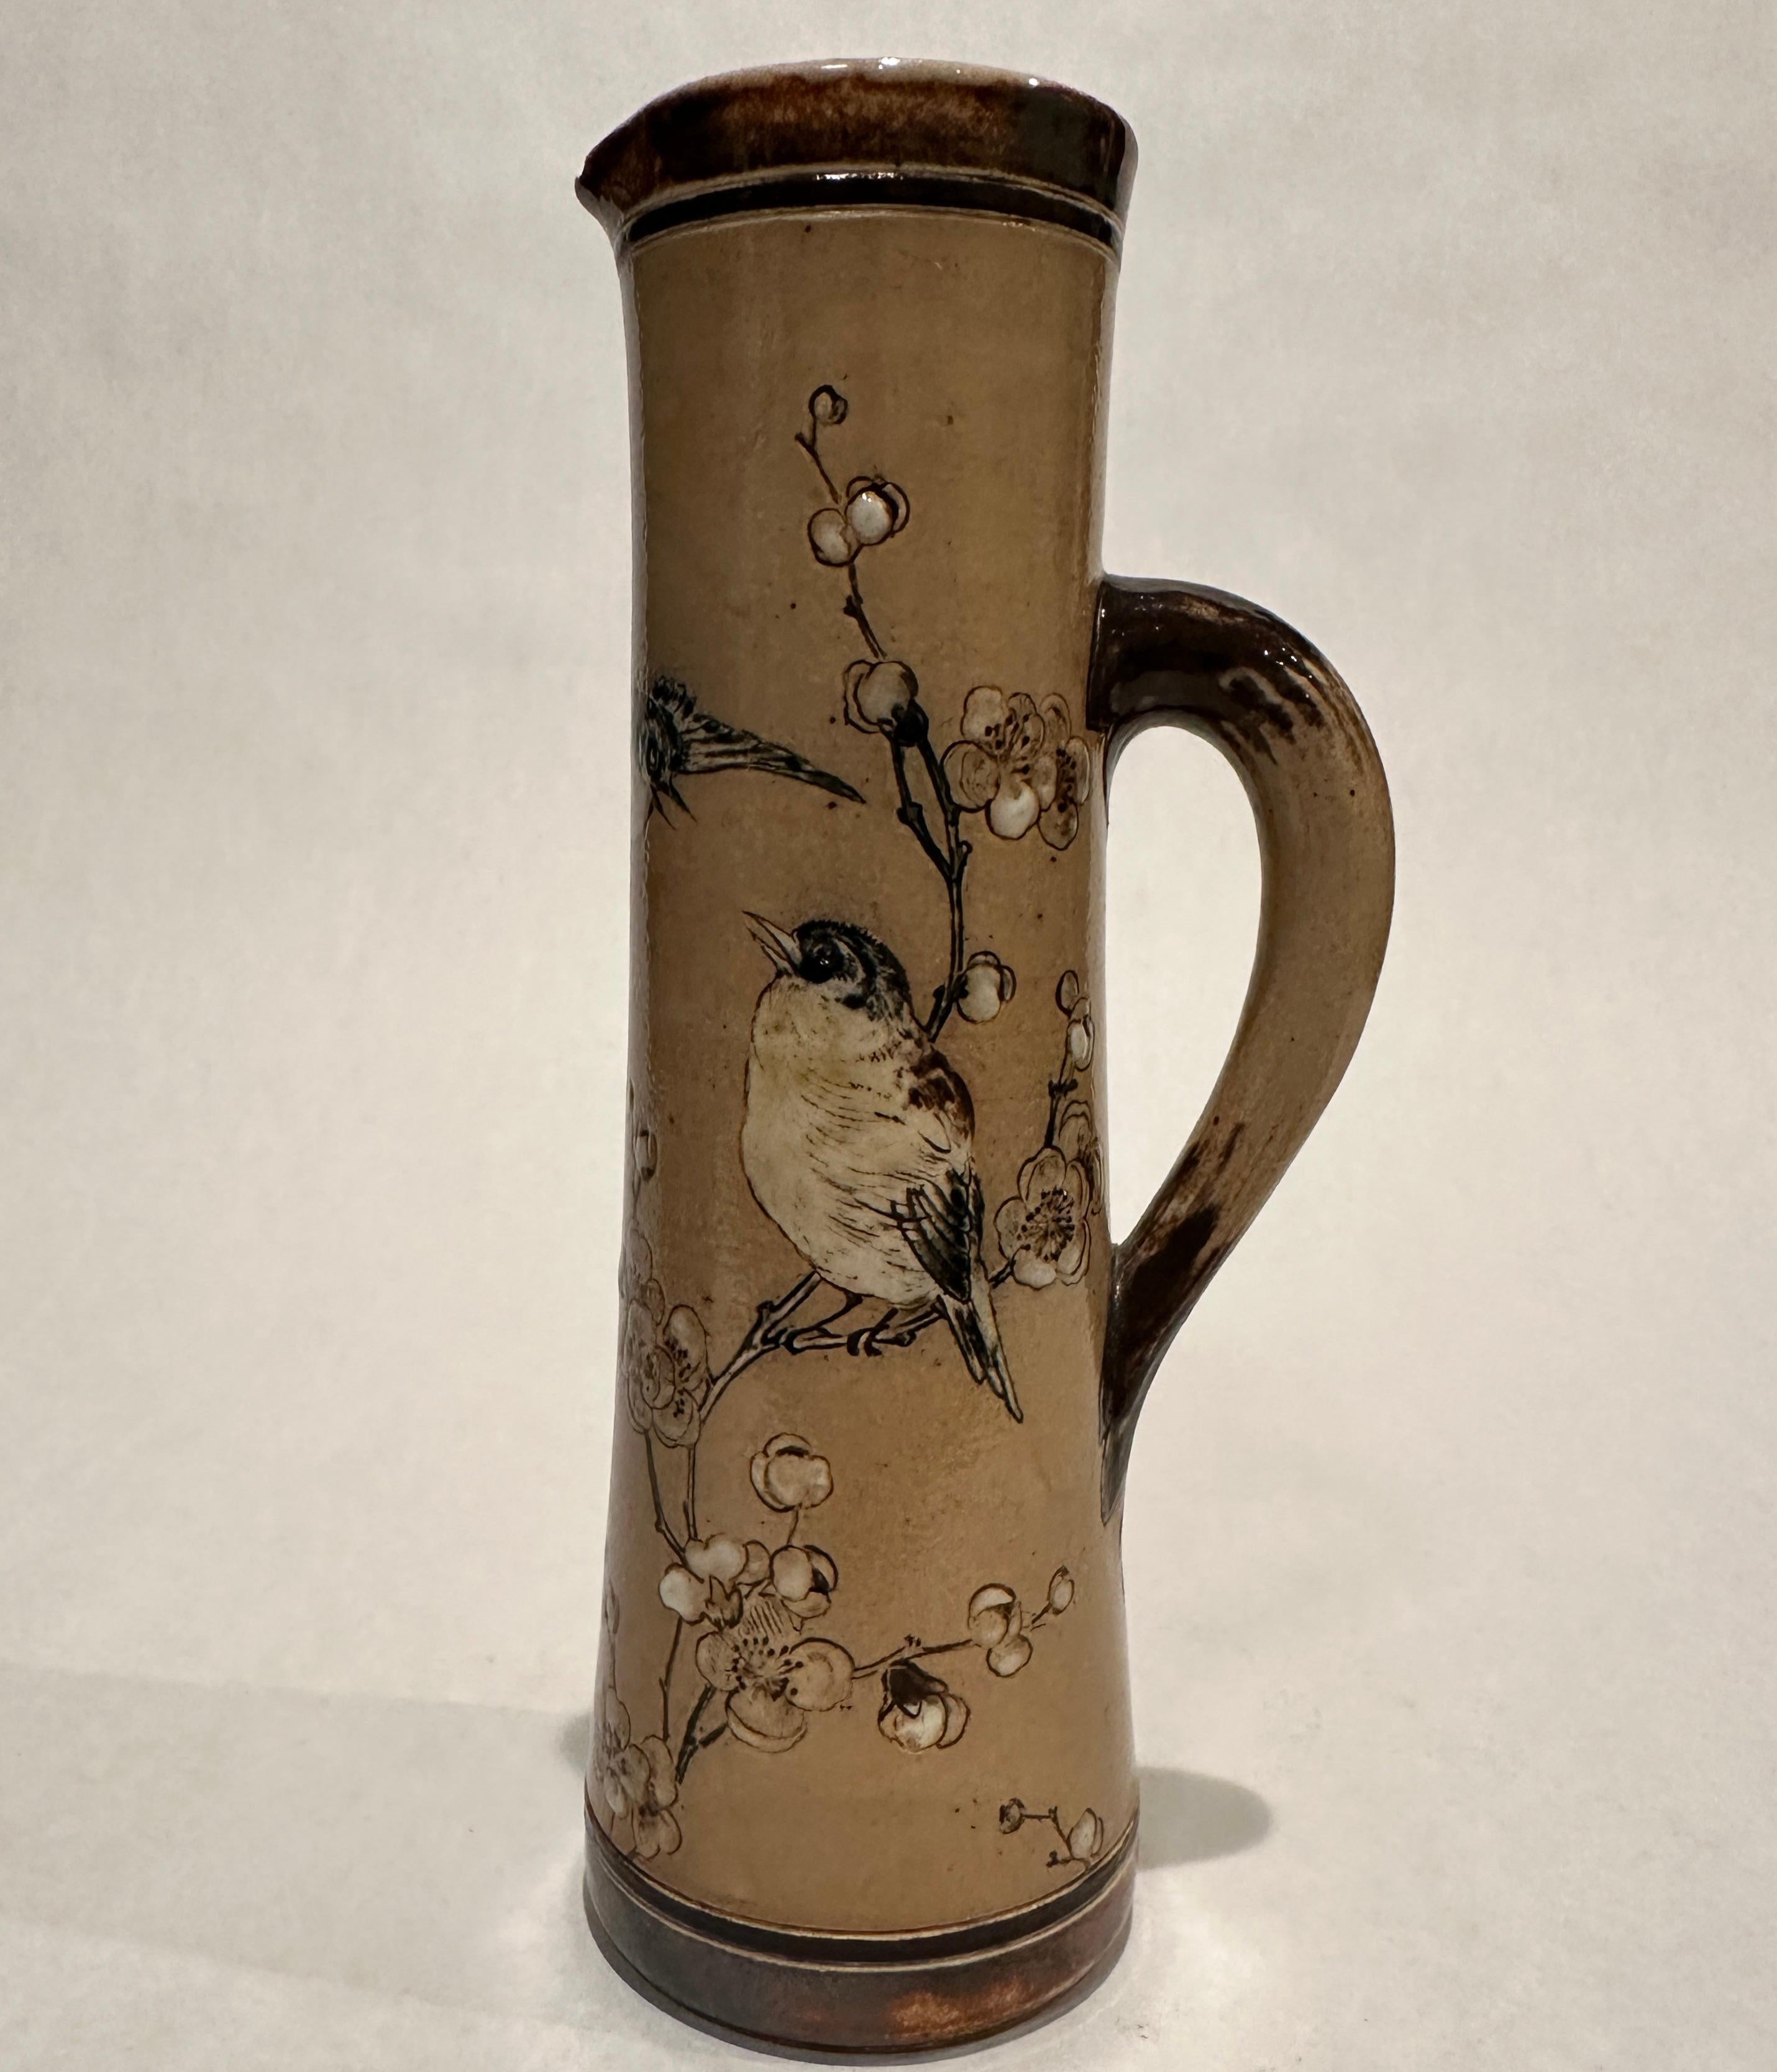 Beautiful pitcher decorated with small birds and butterfly among branches of cherry blossoms. Tan ground with shades of brown and whites. Incised RW Martin & Bros, London & Southall, 3-1886.